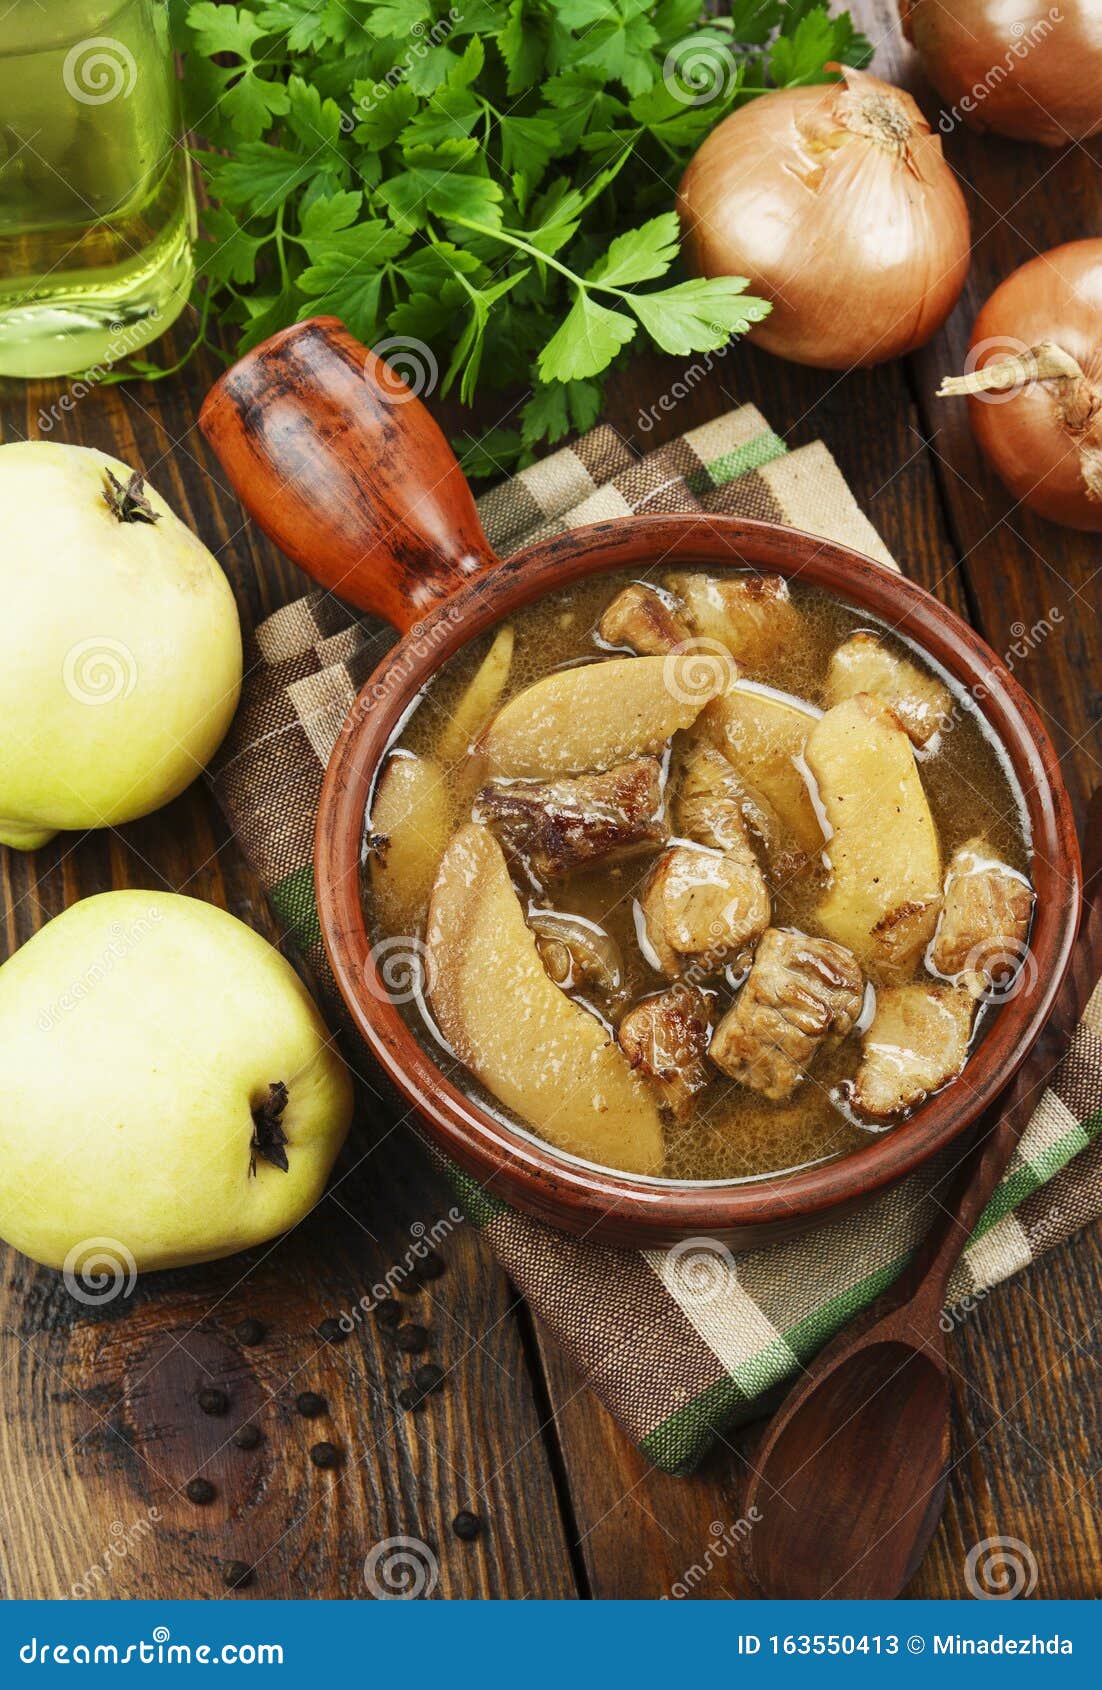 Stew meat with quince stock image. Image of fried, beef - 163550413